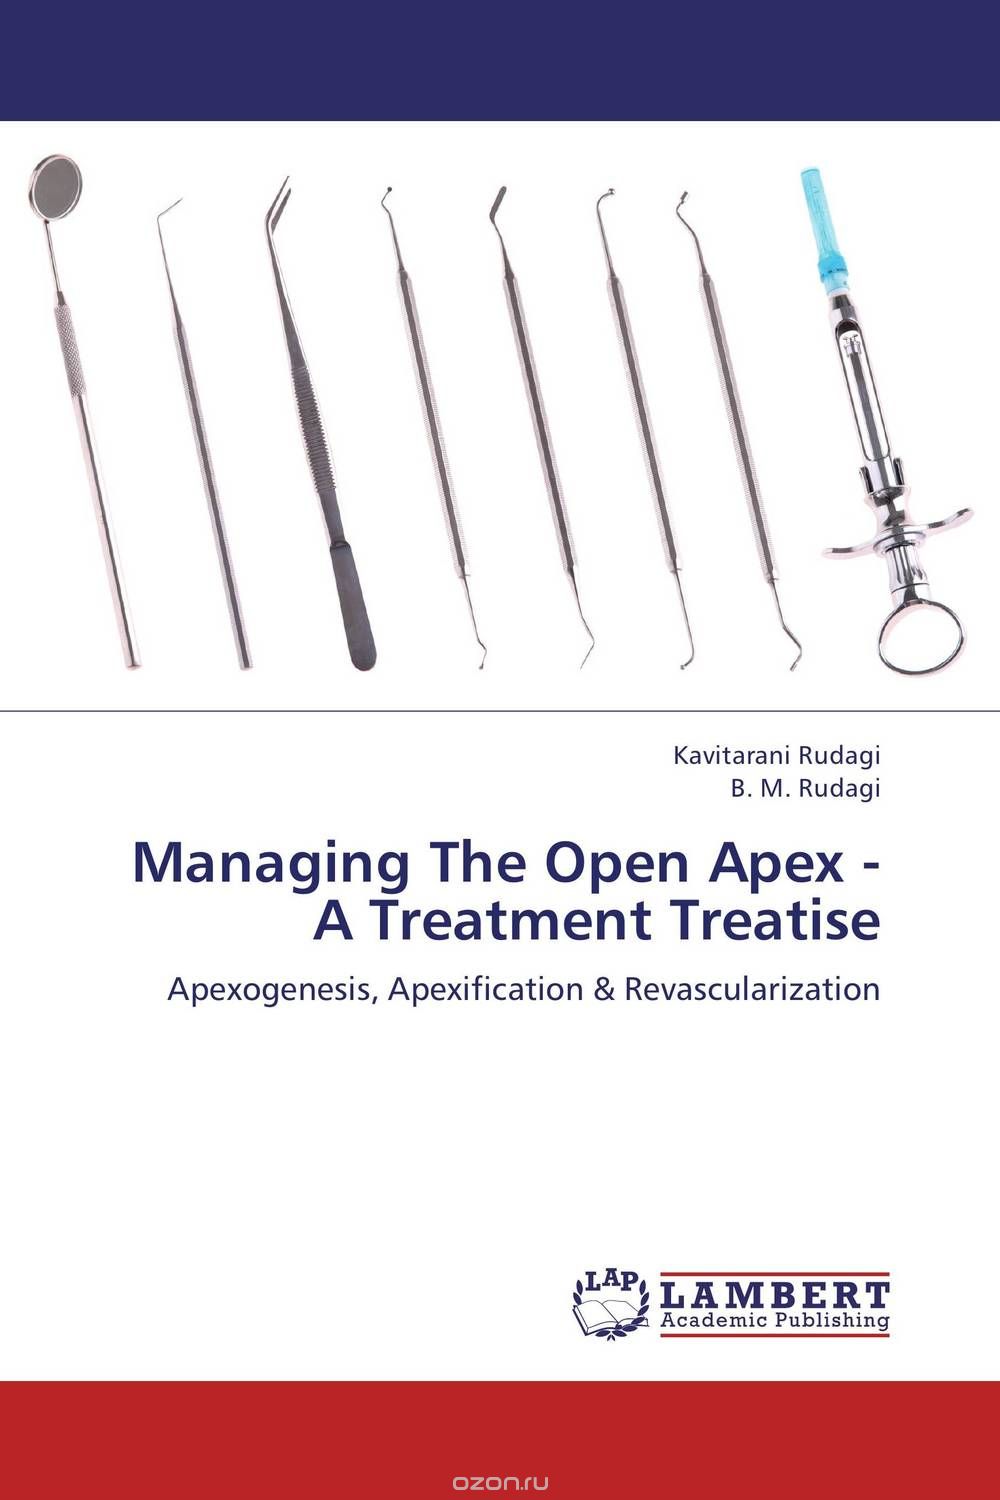 Managing The Open Apex - A Treatment Treatise